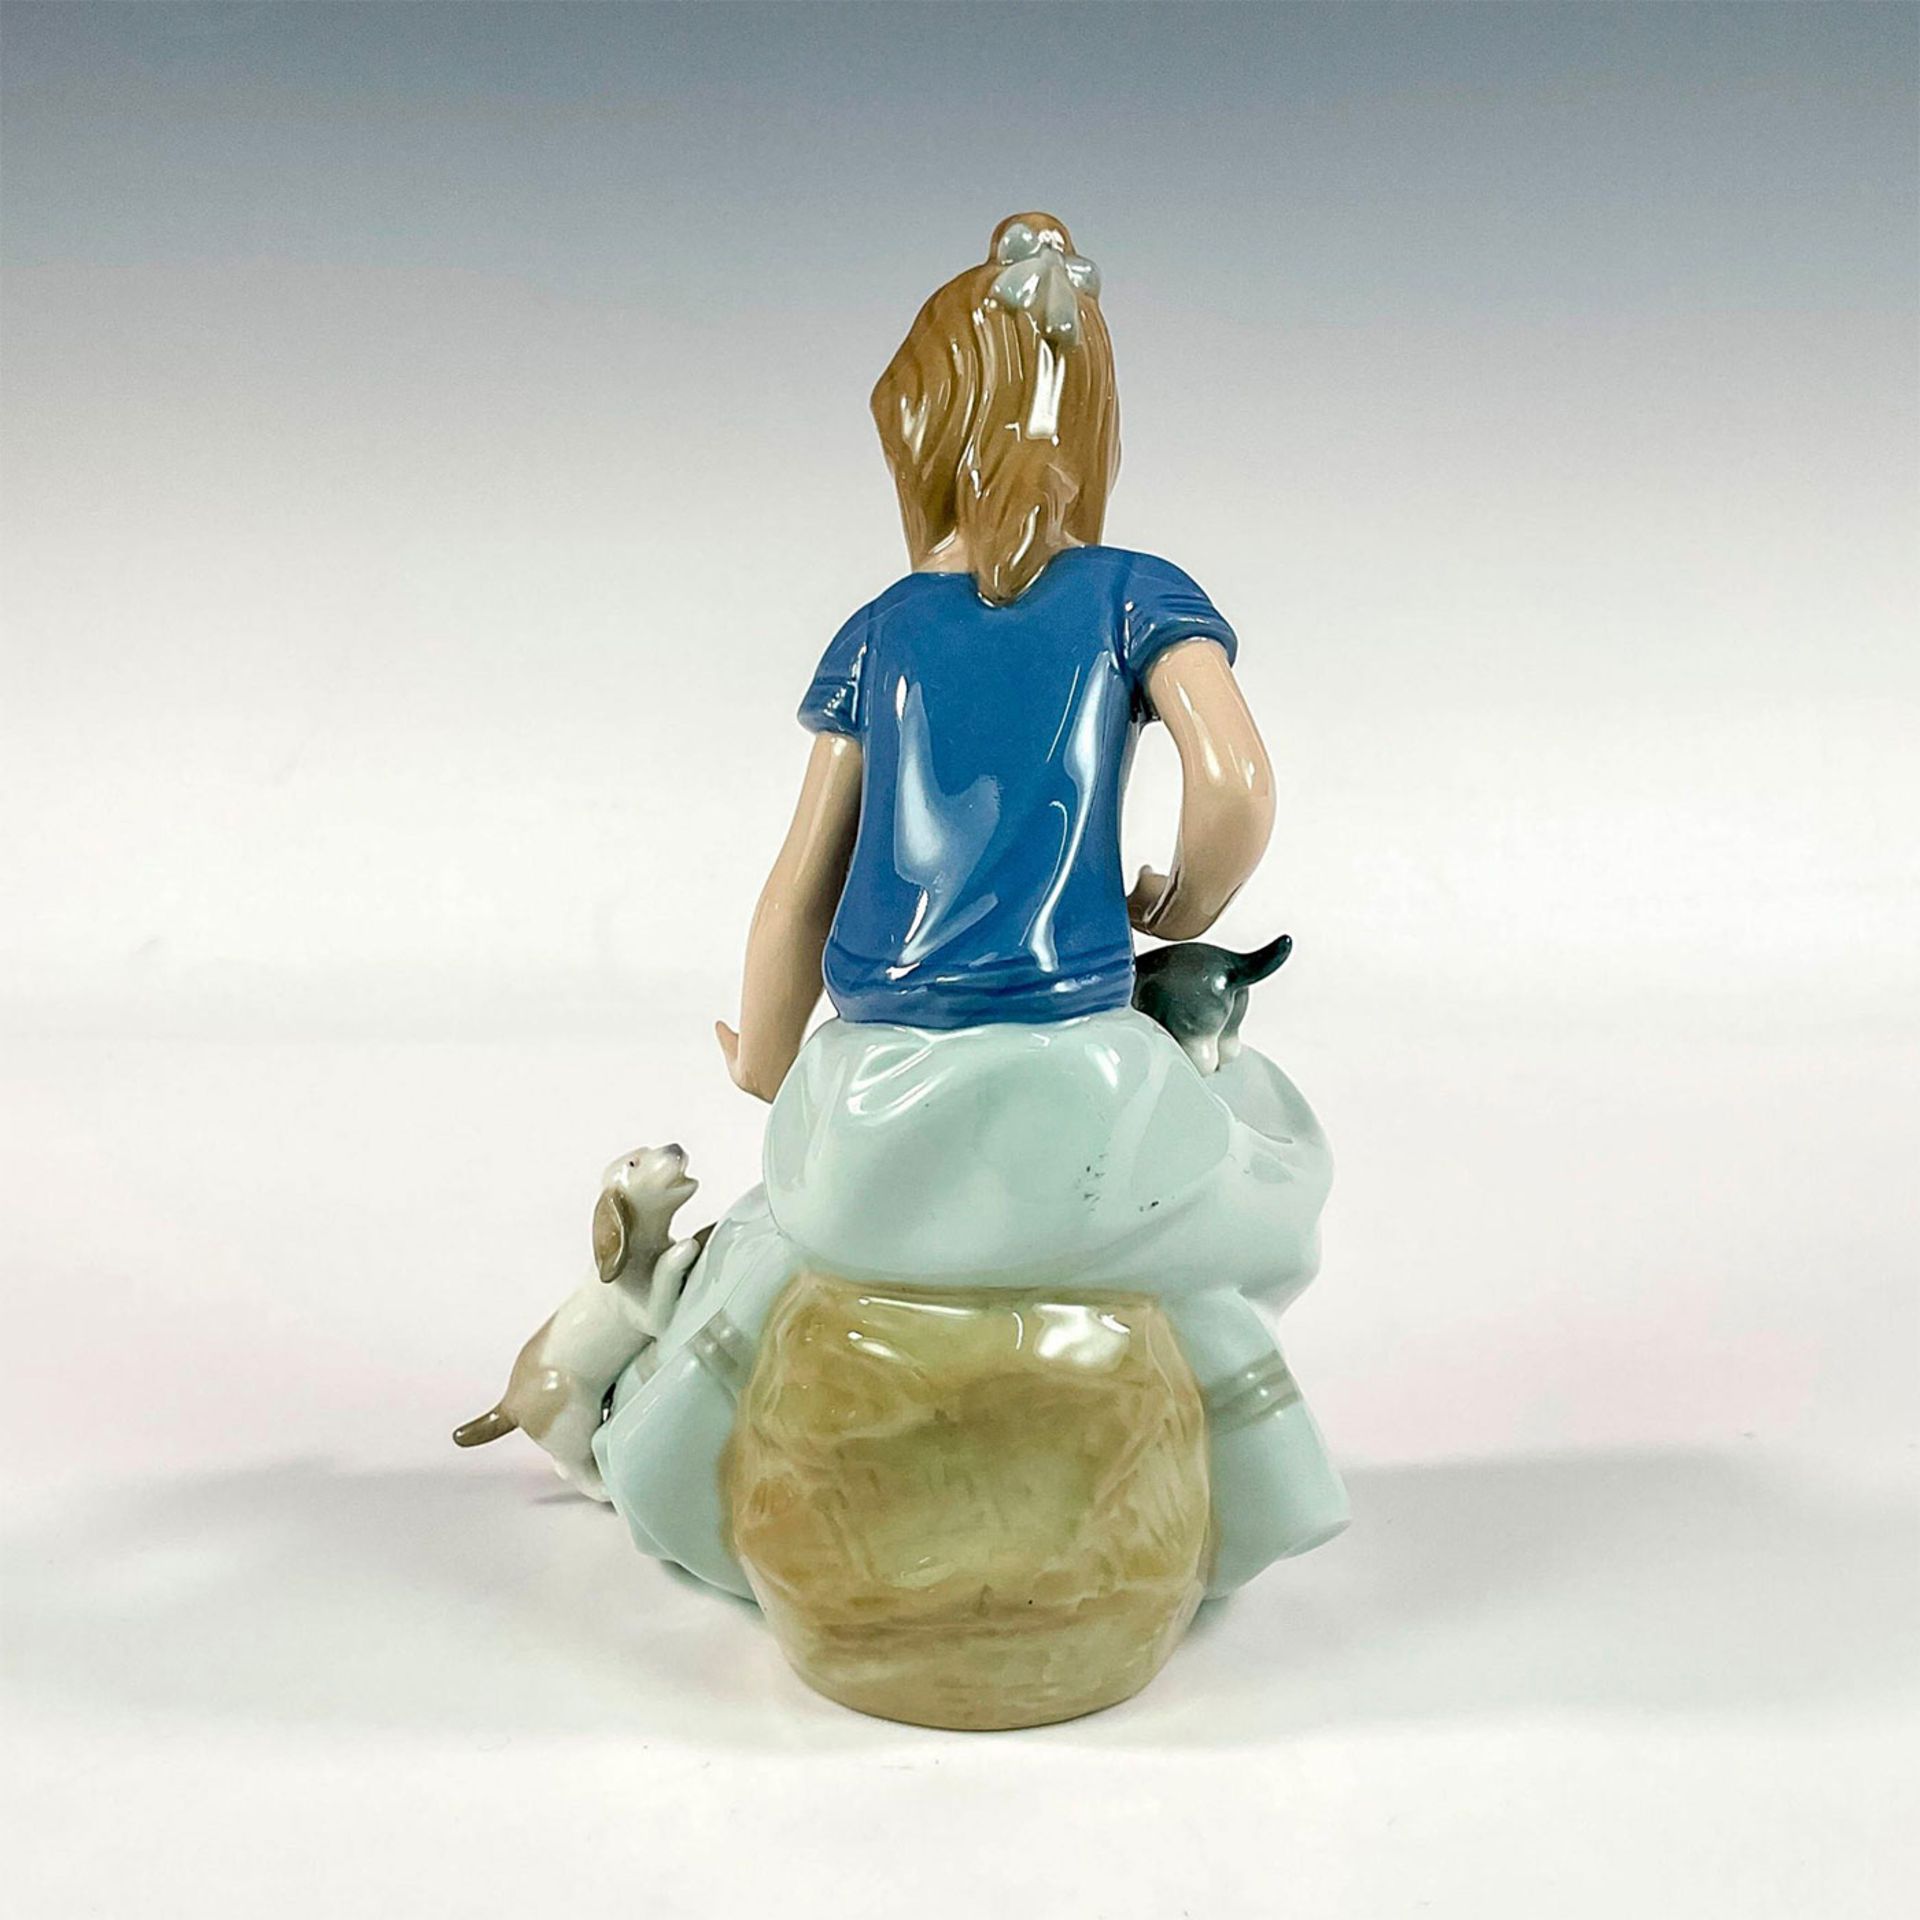 Girl with Puppies - Nao by Lladro Porcelain Figurine - Image 2 of 3